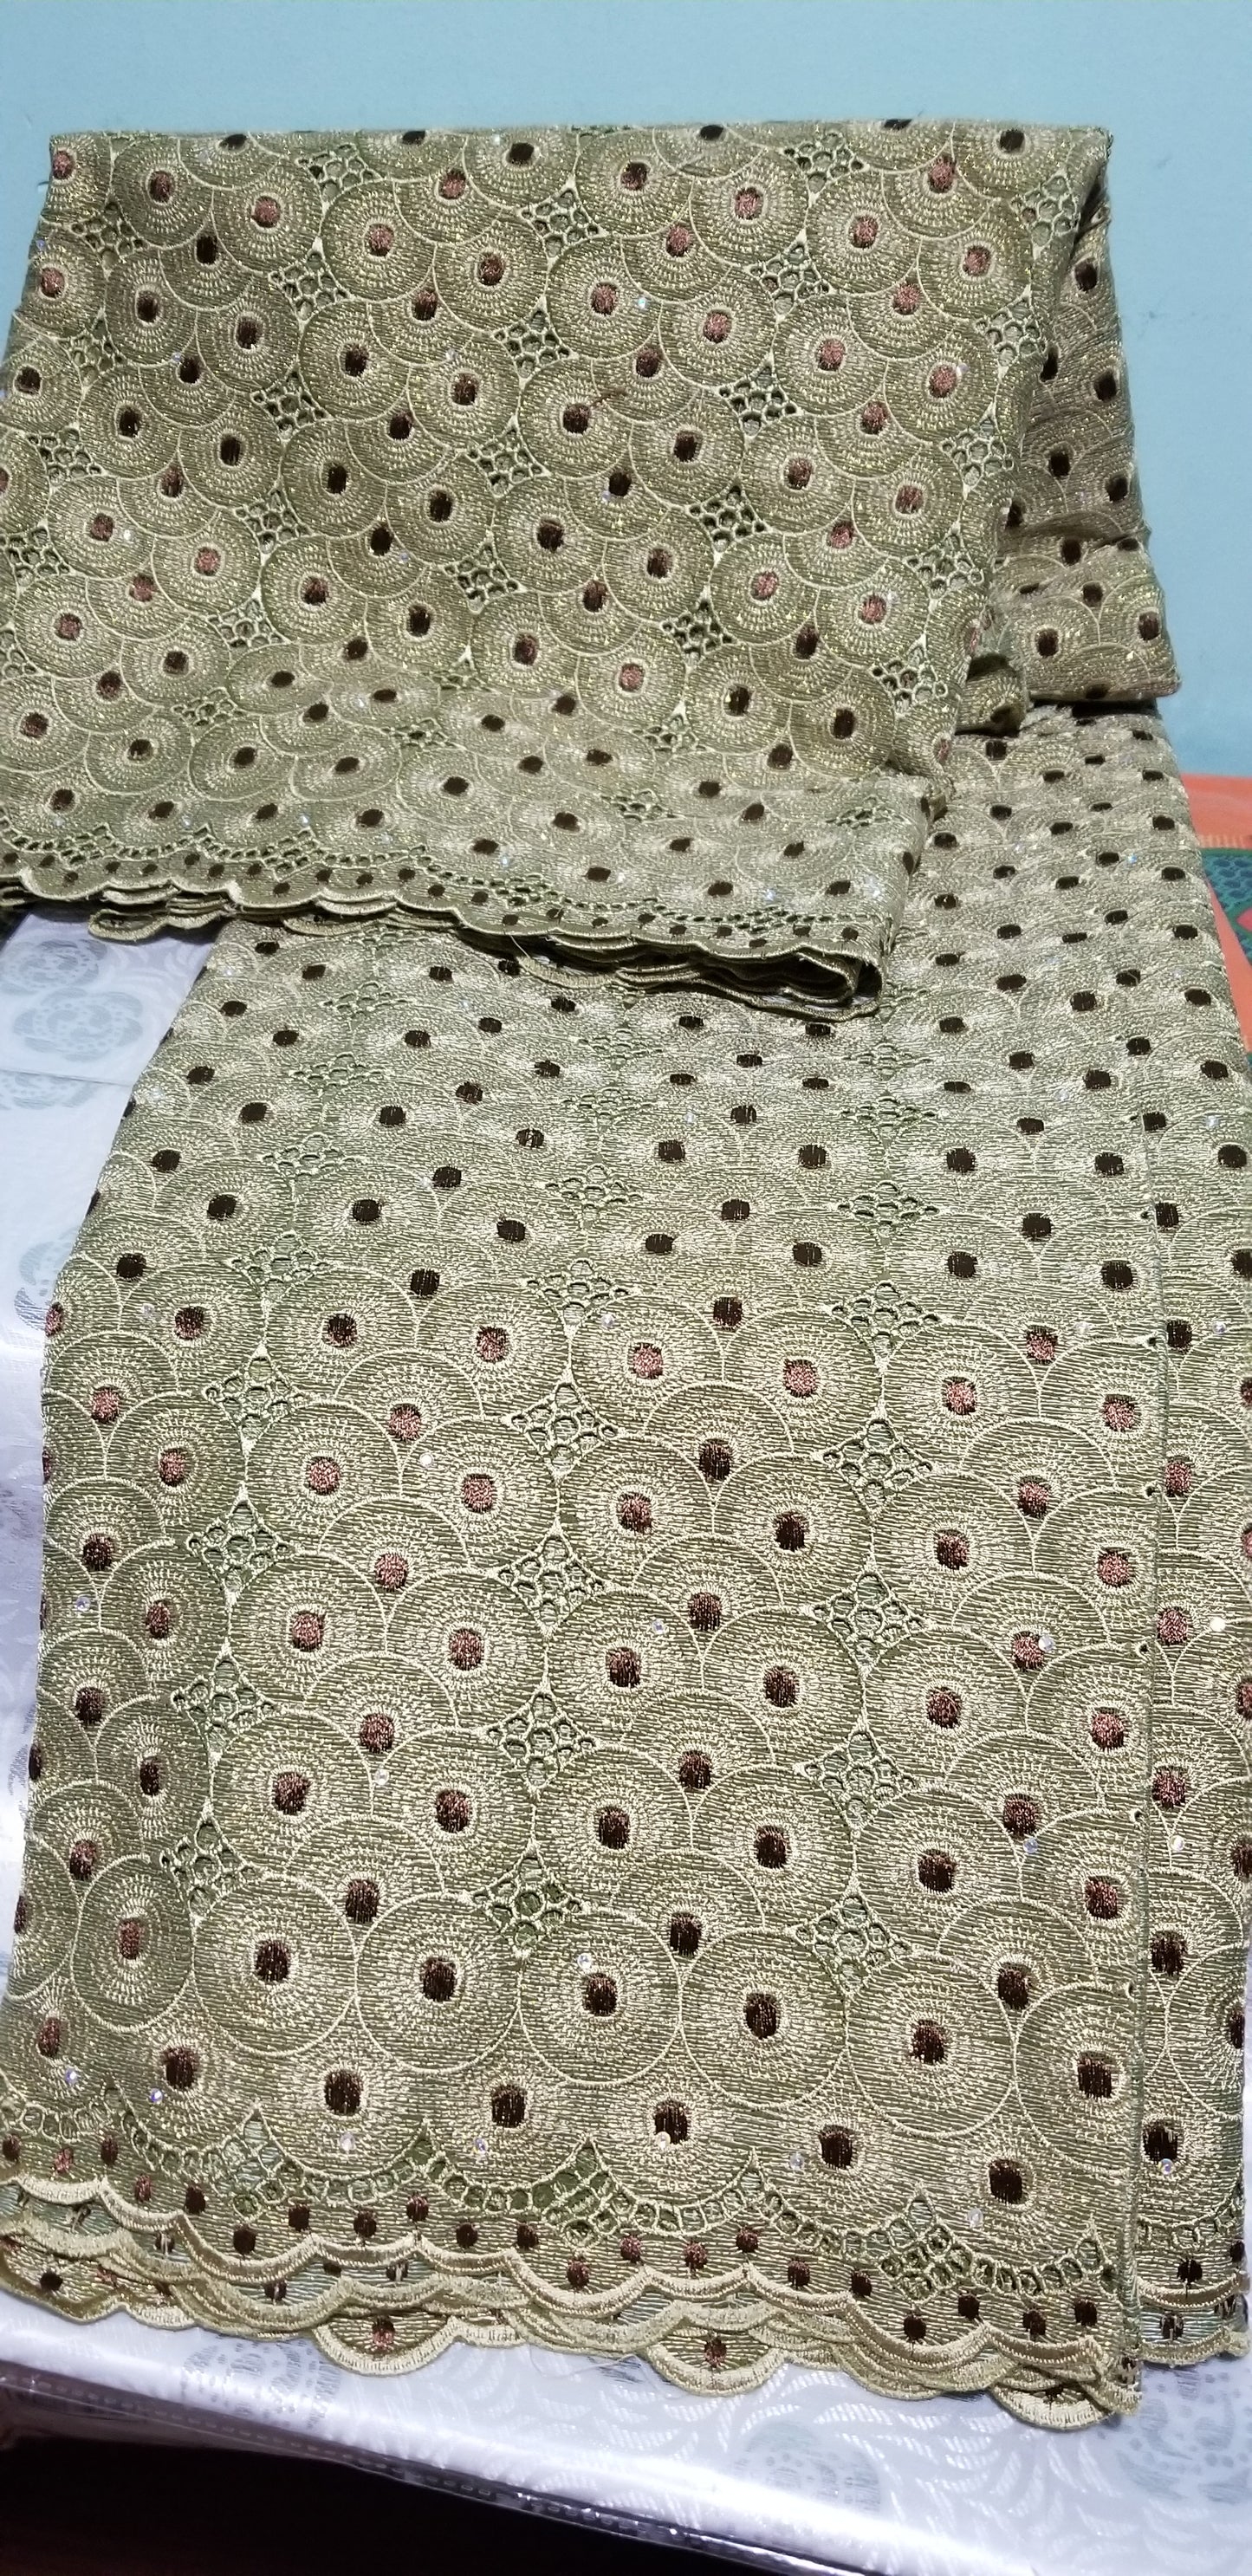 Classic Olive green swiss lace fabric. Embellish with gold lurex and crystal stones. Soft quality swiss lace sold in 5yds, price is for 5yds. Ideal color for men or women Nigerian traditional outfit